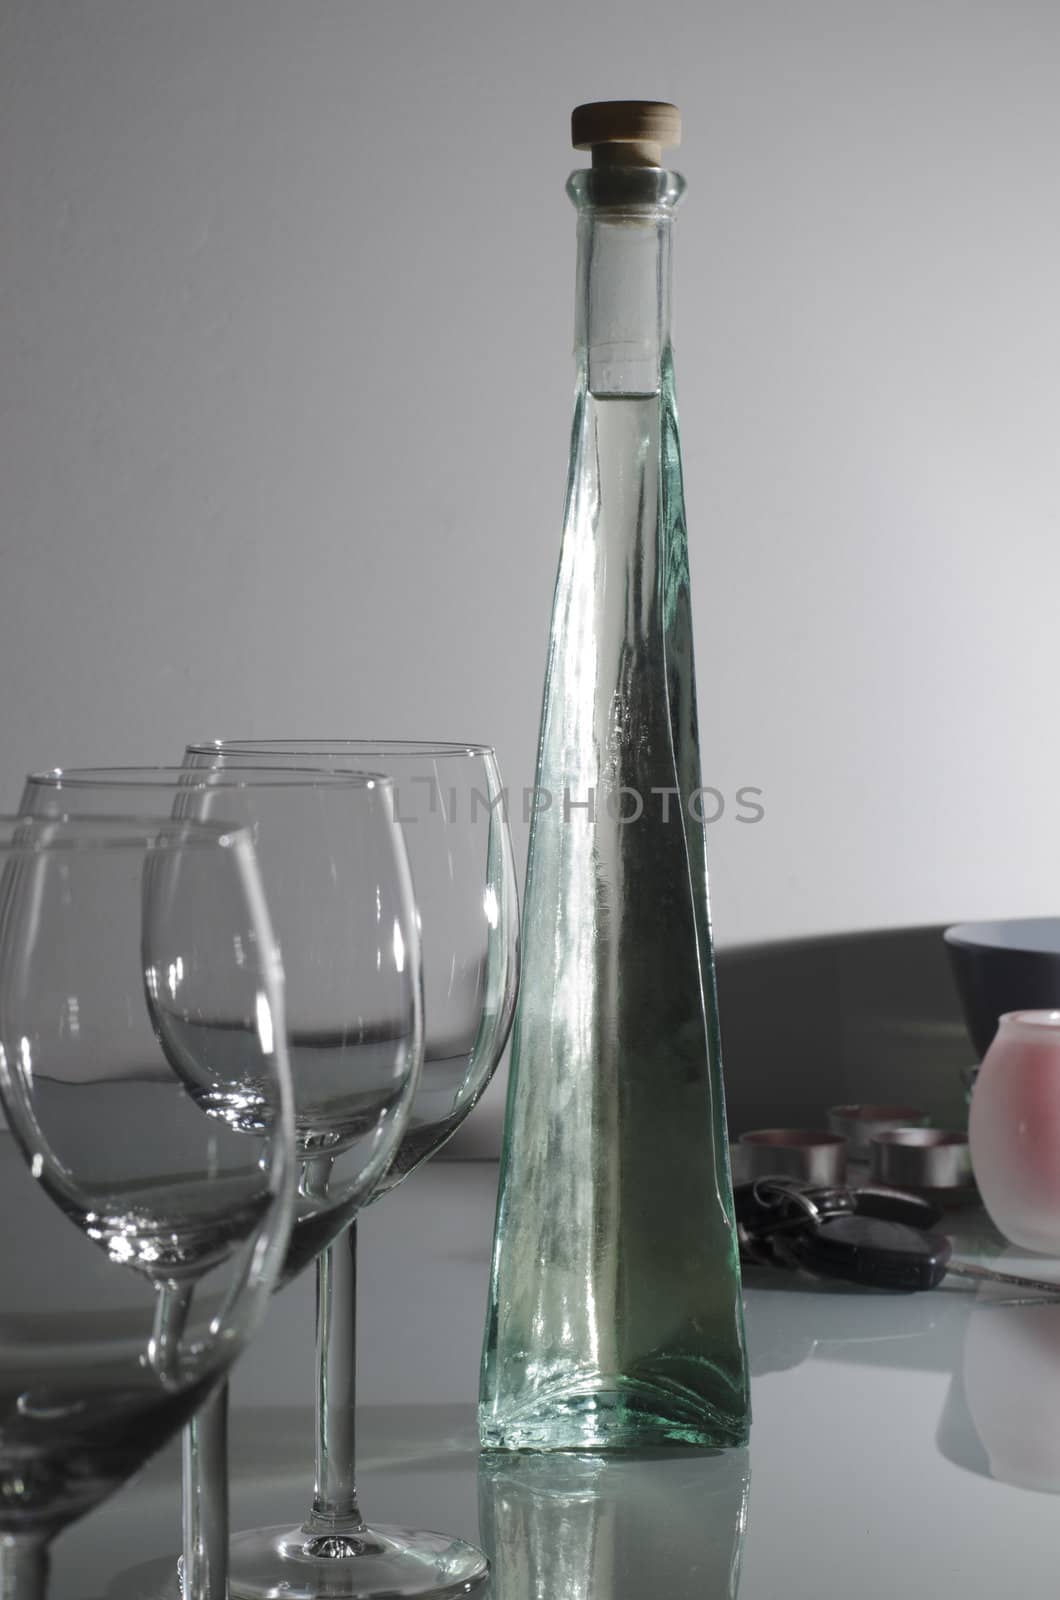 liquor bottle with glasses and miscellaneous object on bar stand